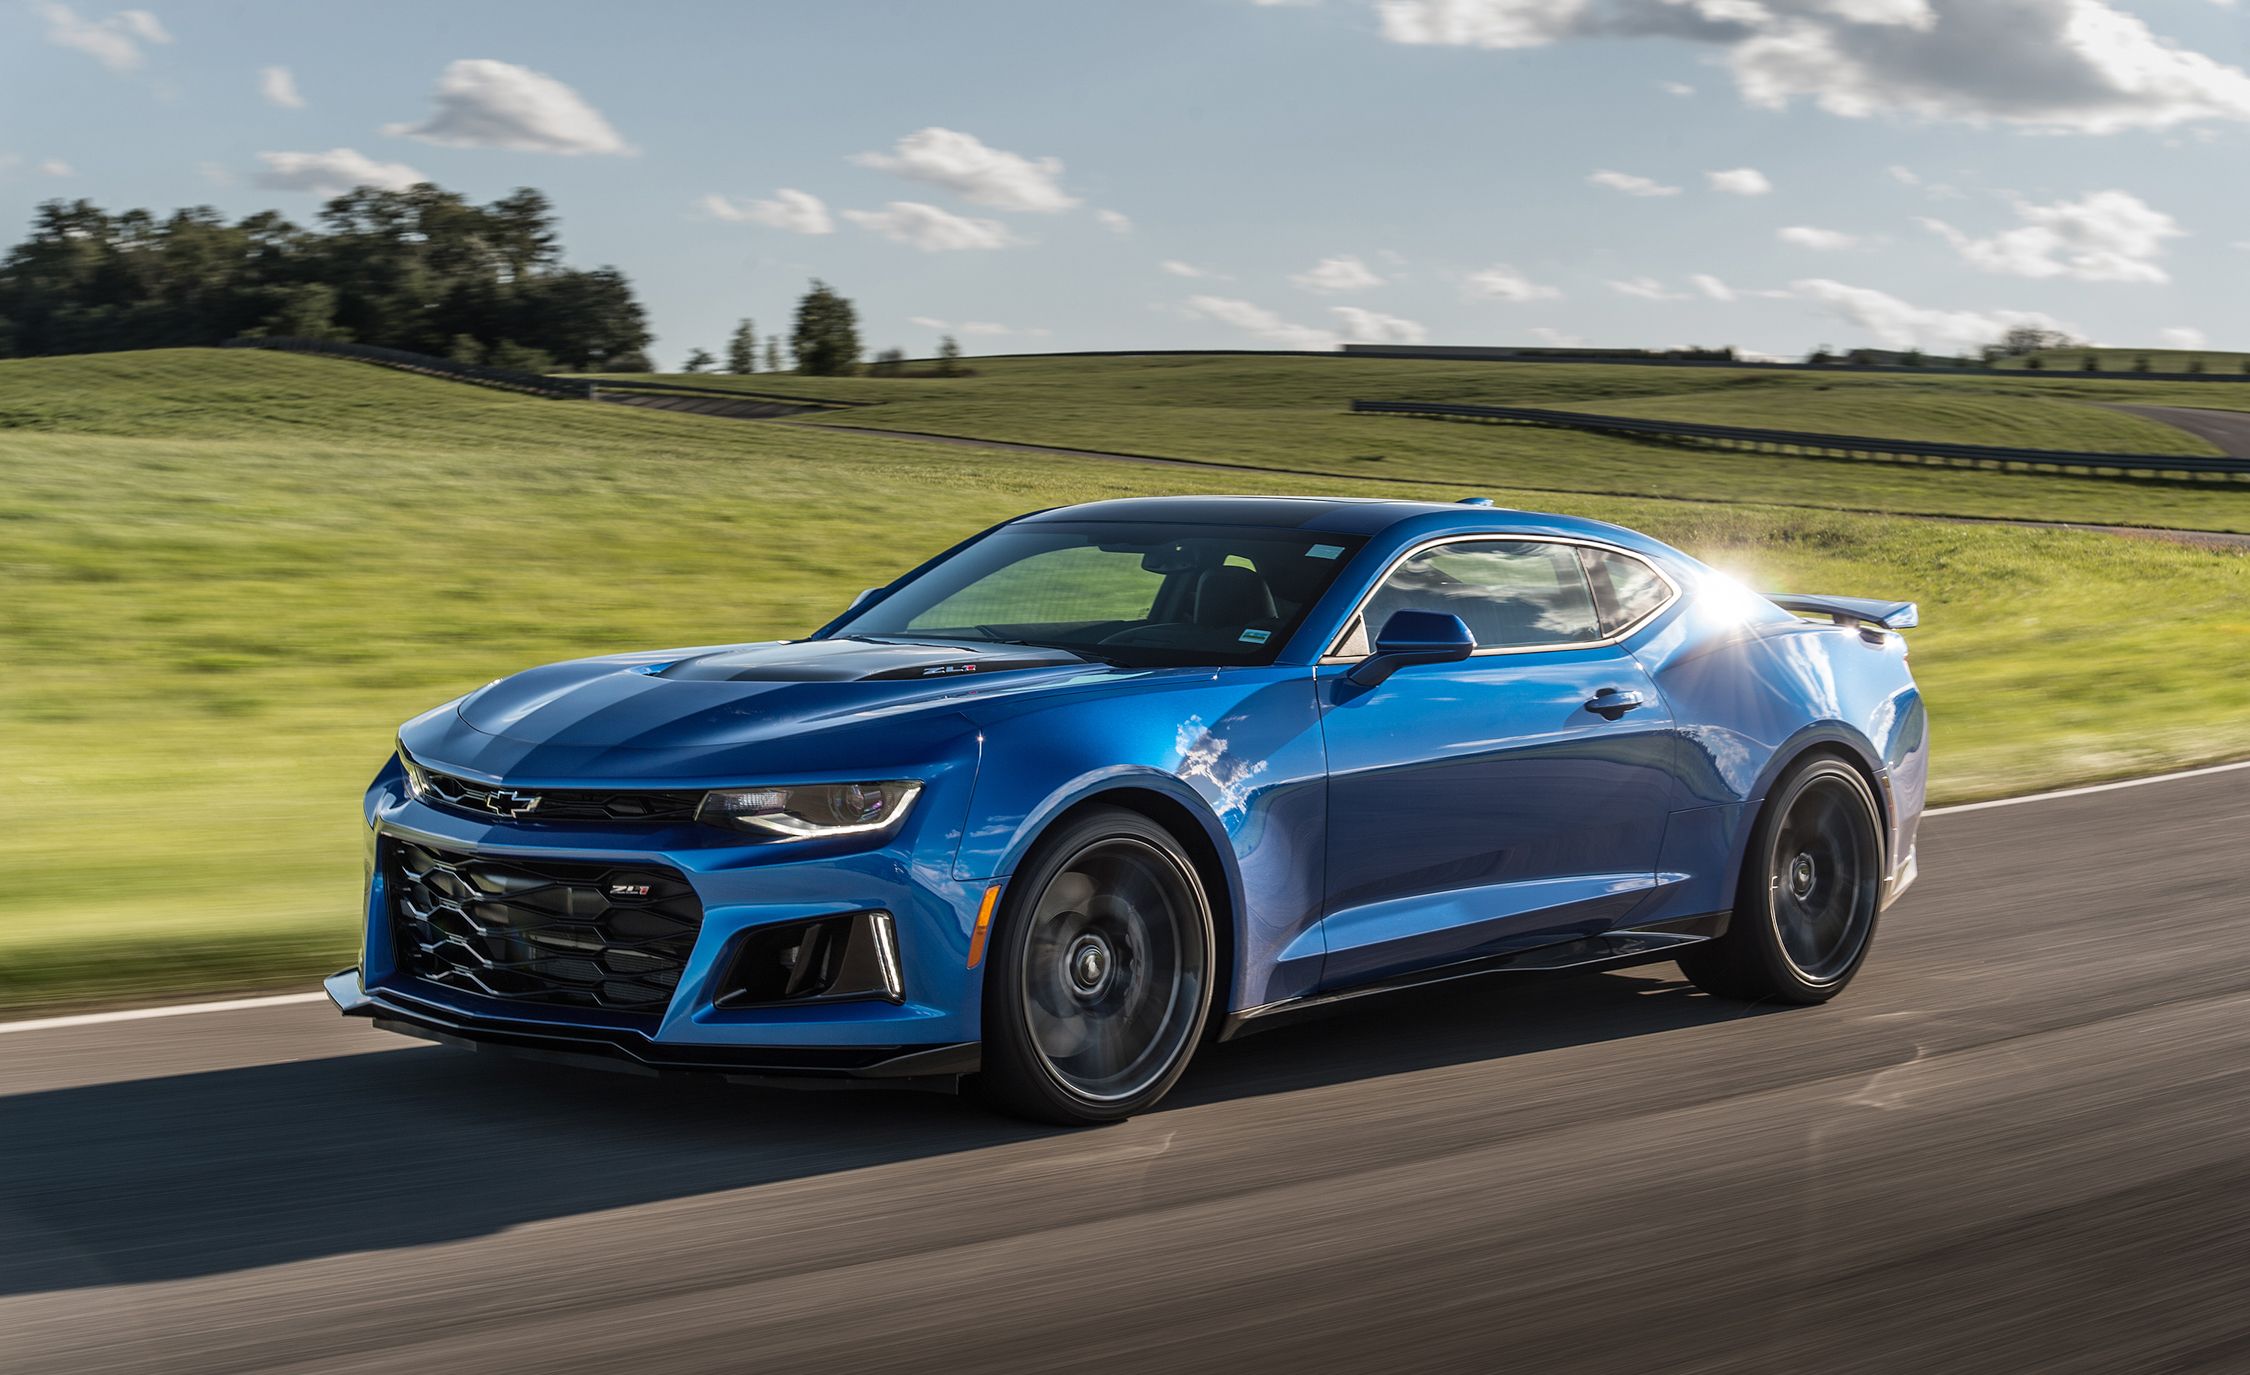 2018 Chevrolet Camaro Zl1 Review, Pricing, And Specs